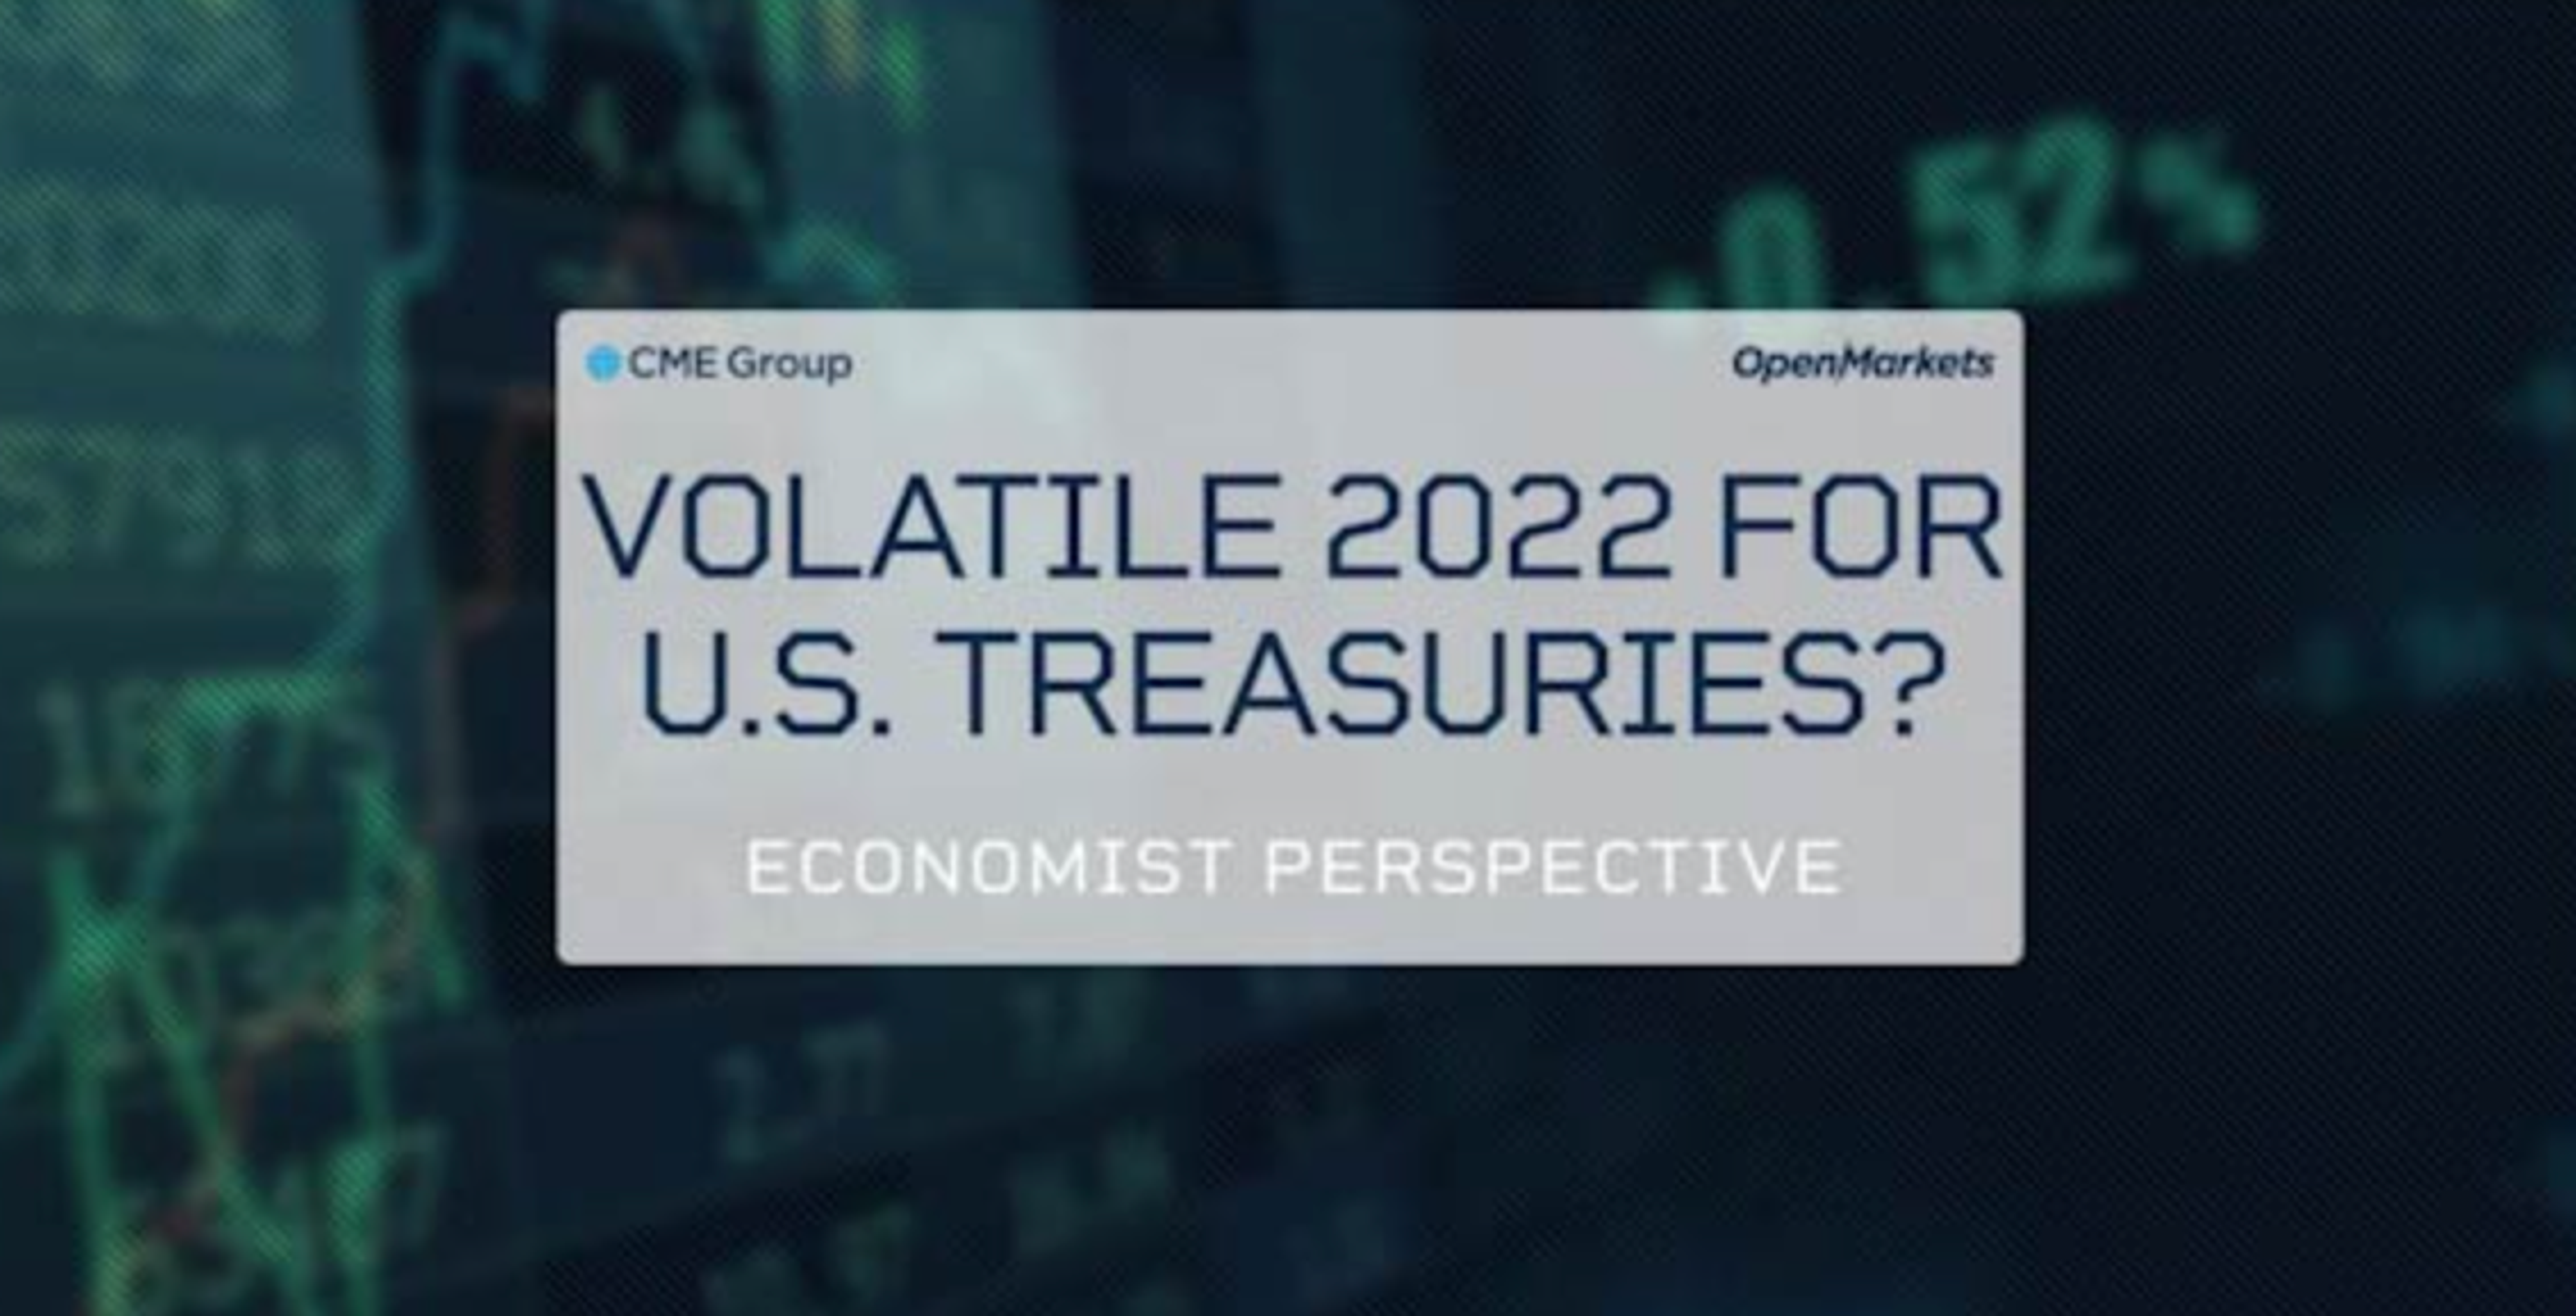 Three Reasons Why it Could be a Volatile Year for U.S. Treasuries